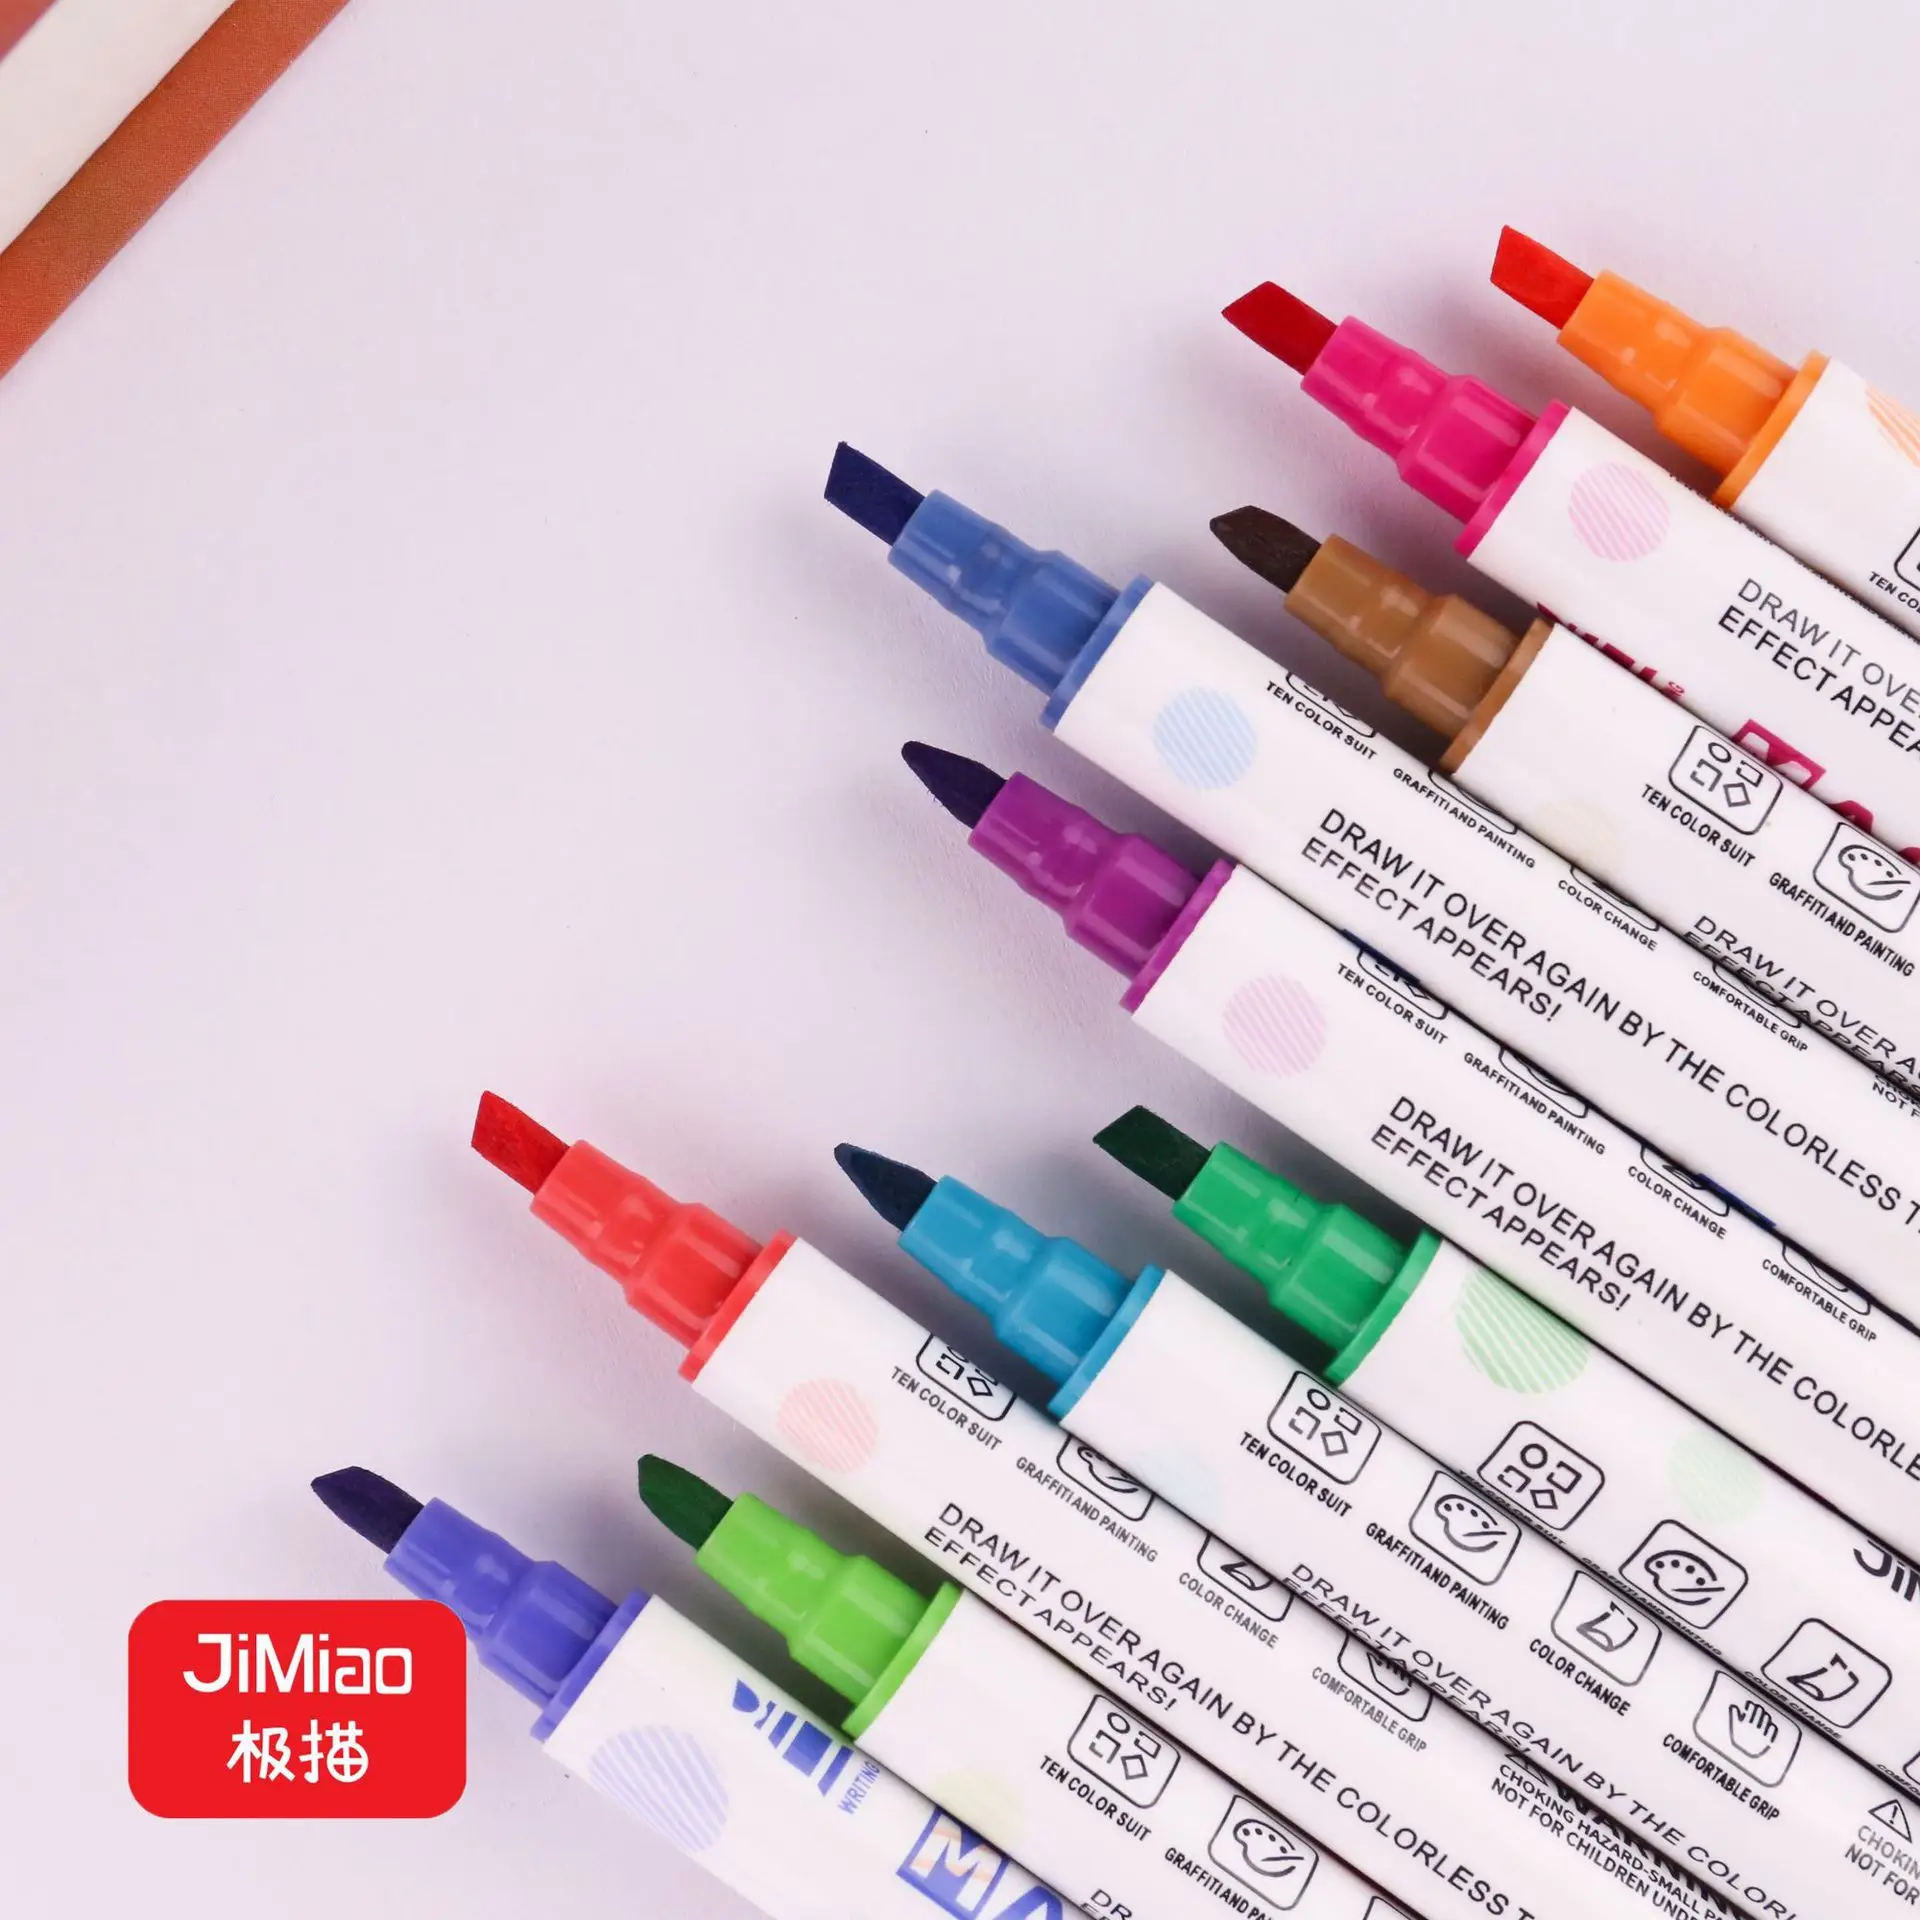 https://ae01.alicdn.com/kf/Ha4b03c2f91864c969c8b642a1048a2817/12pcs-Magic-Variable-Color-Drawing-Pen-Set-Discolored-Highlighter-Marker-Pens-Scrapbooking-Art-Supplies-Stationery-School.jpg